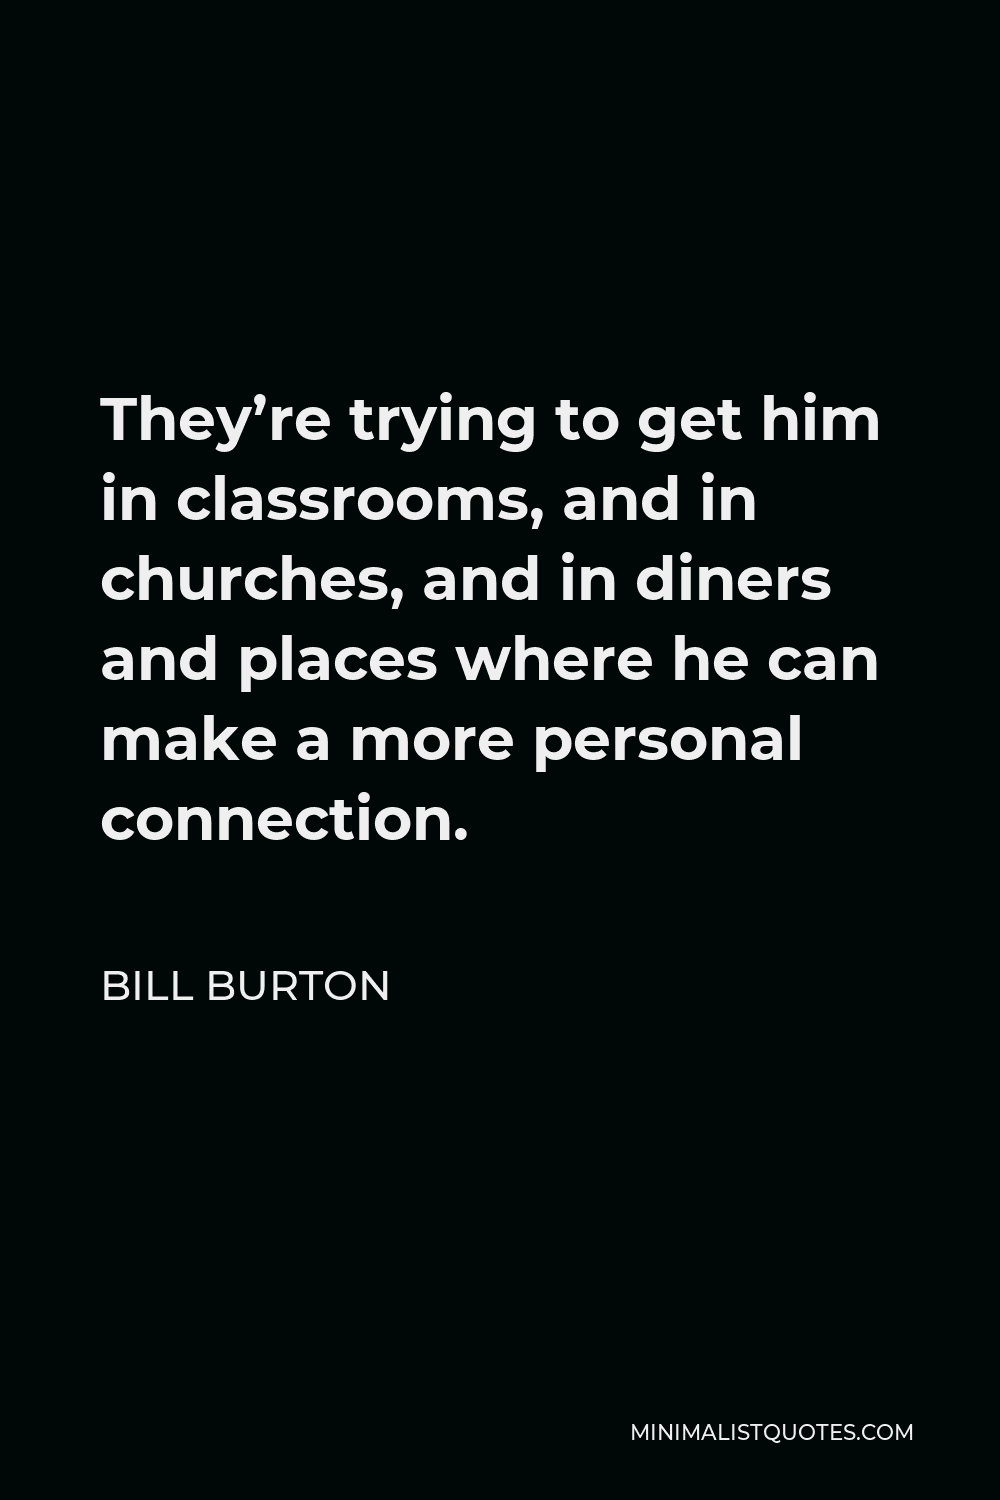 Bill Burton Quote - They’re trying to get him in classrooms, and in churches, and in diners and places where he can make a more personal connection.